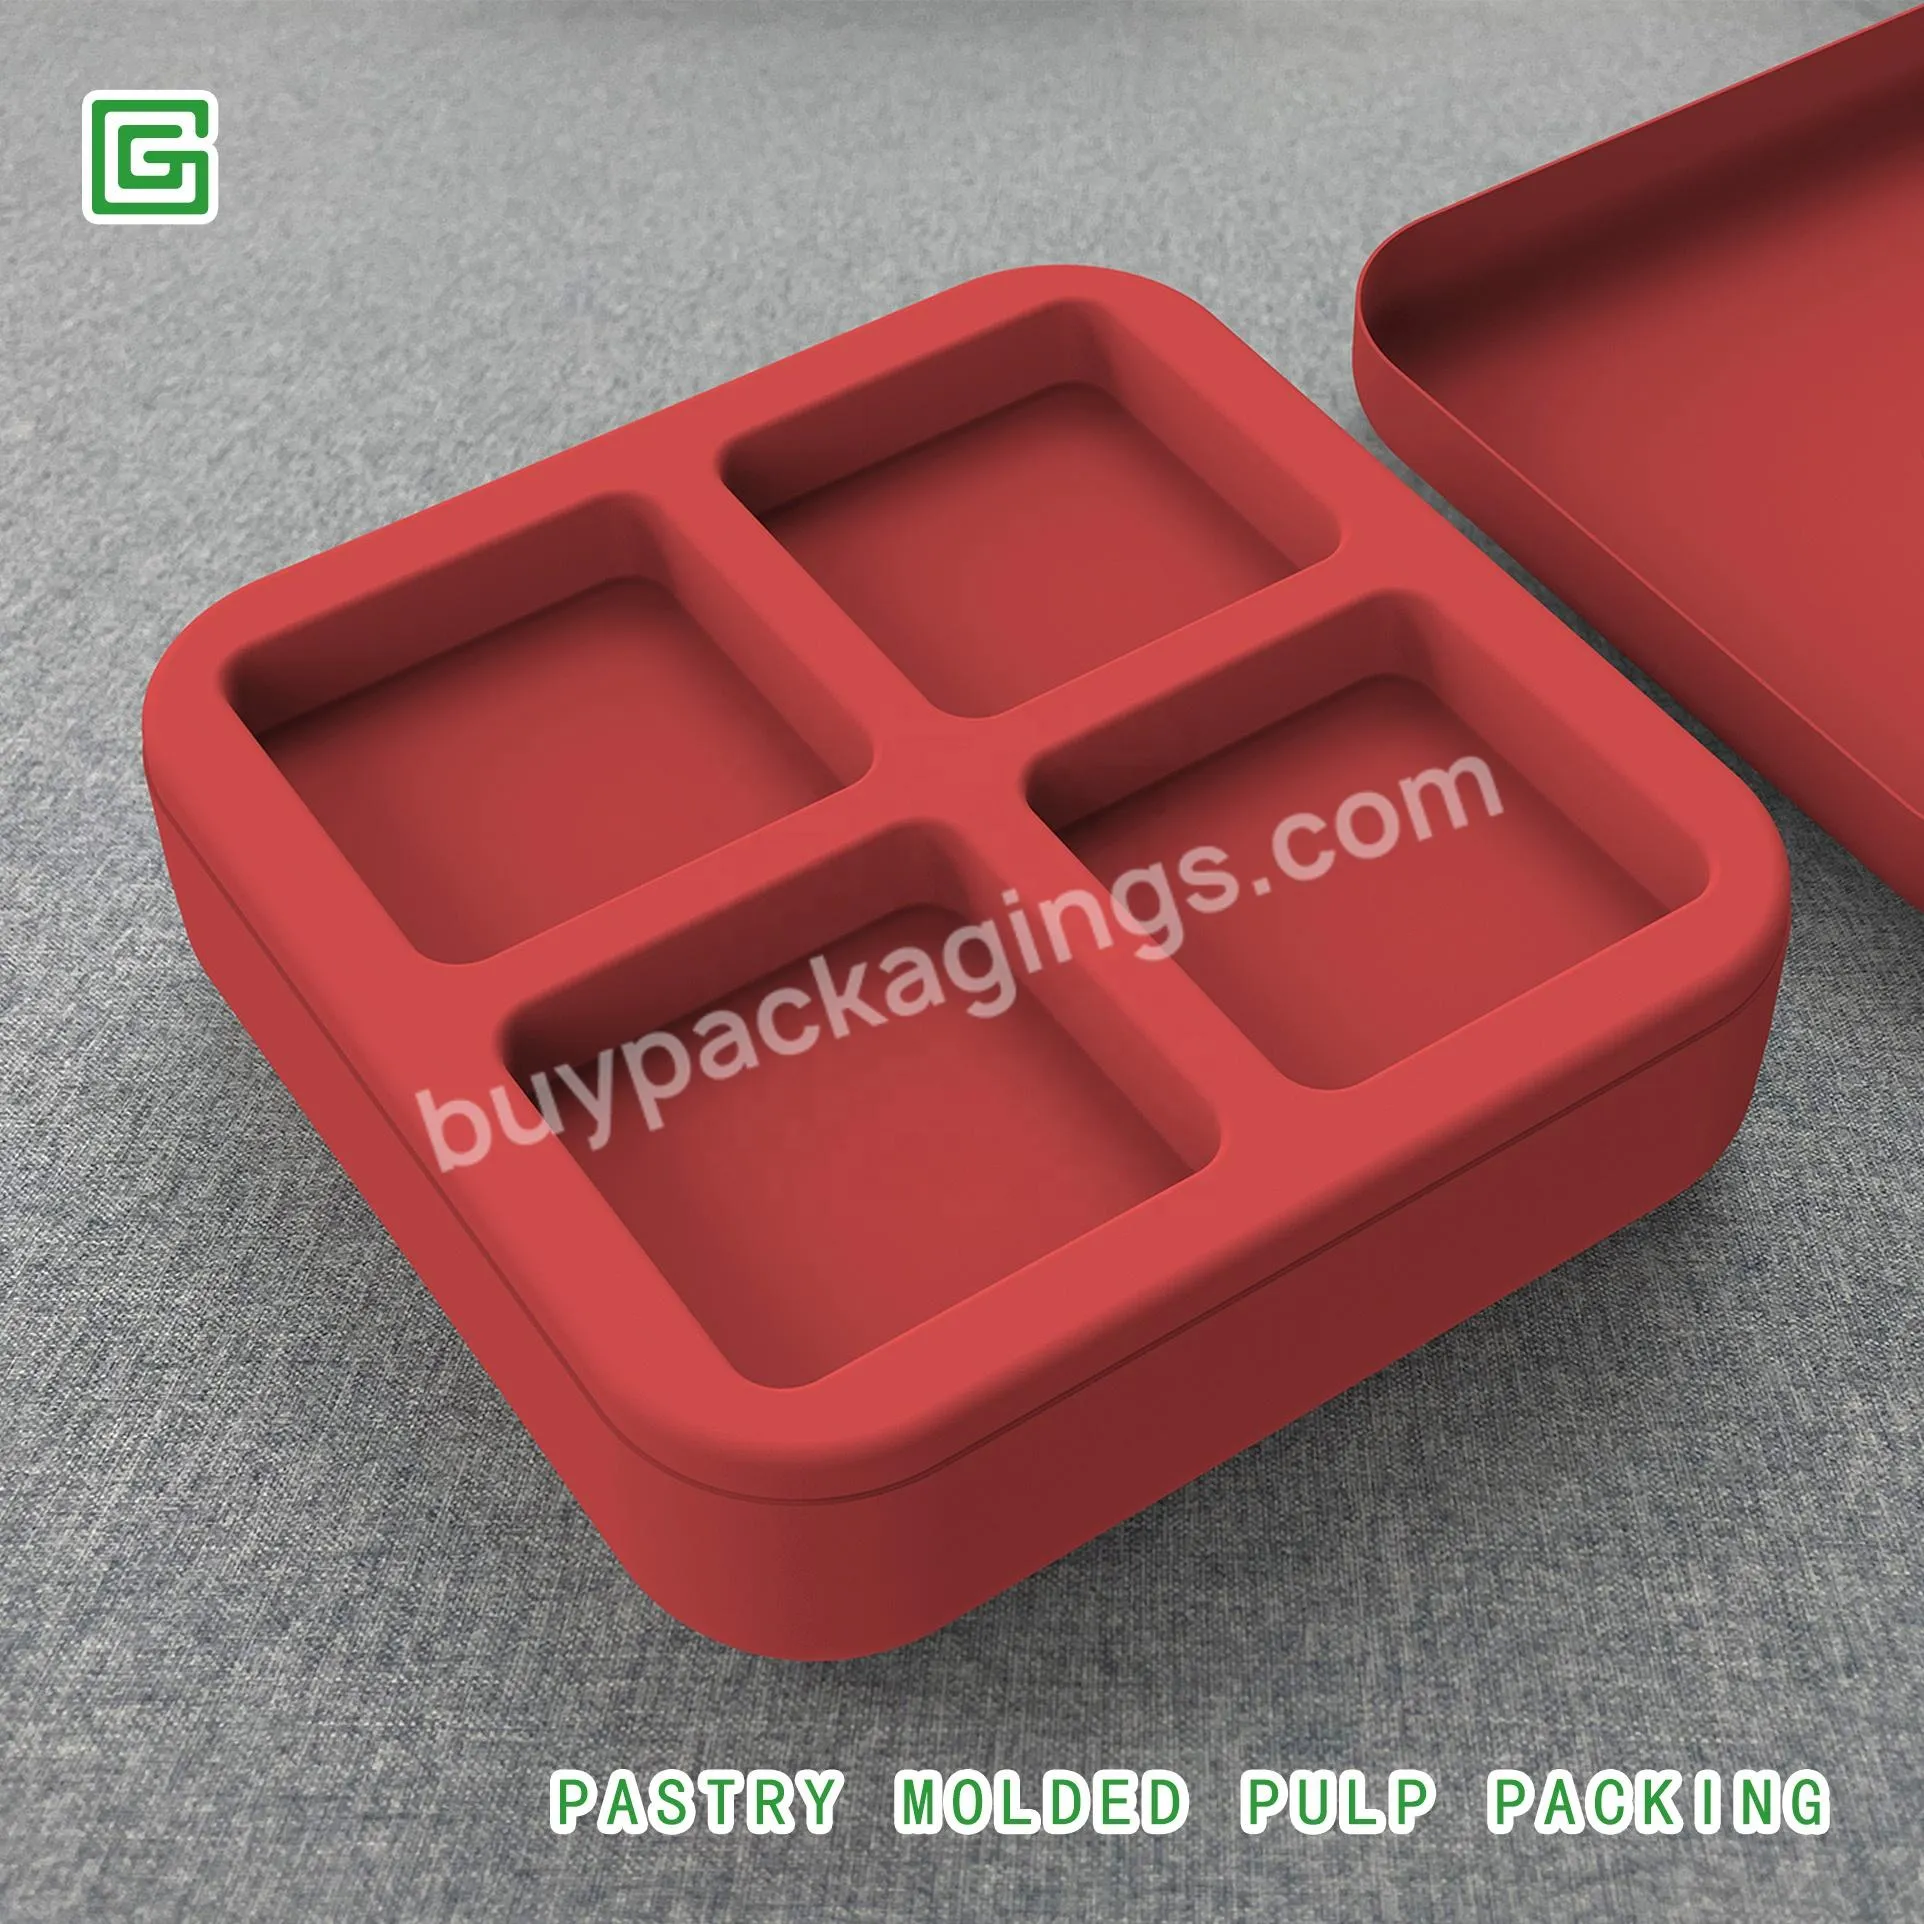 2023 Wholesale High Quality Custom Paper Boxes Molded Pulp Pastry Packaging - Buy Custom Molded Pulp Packaging,Molded Paper Pulp Packaging Box Cosmetic Pulp,Pulp Packaging Mold.